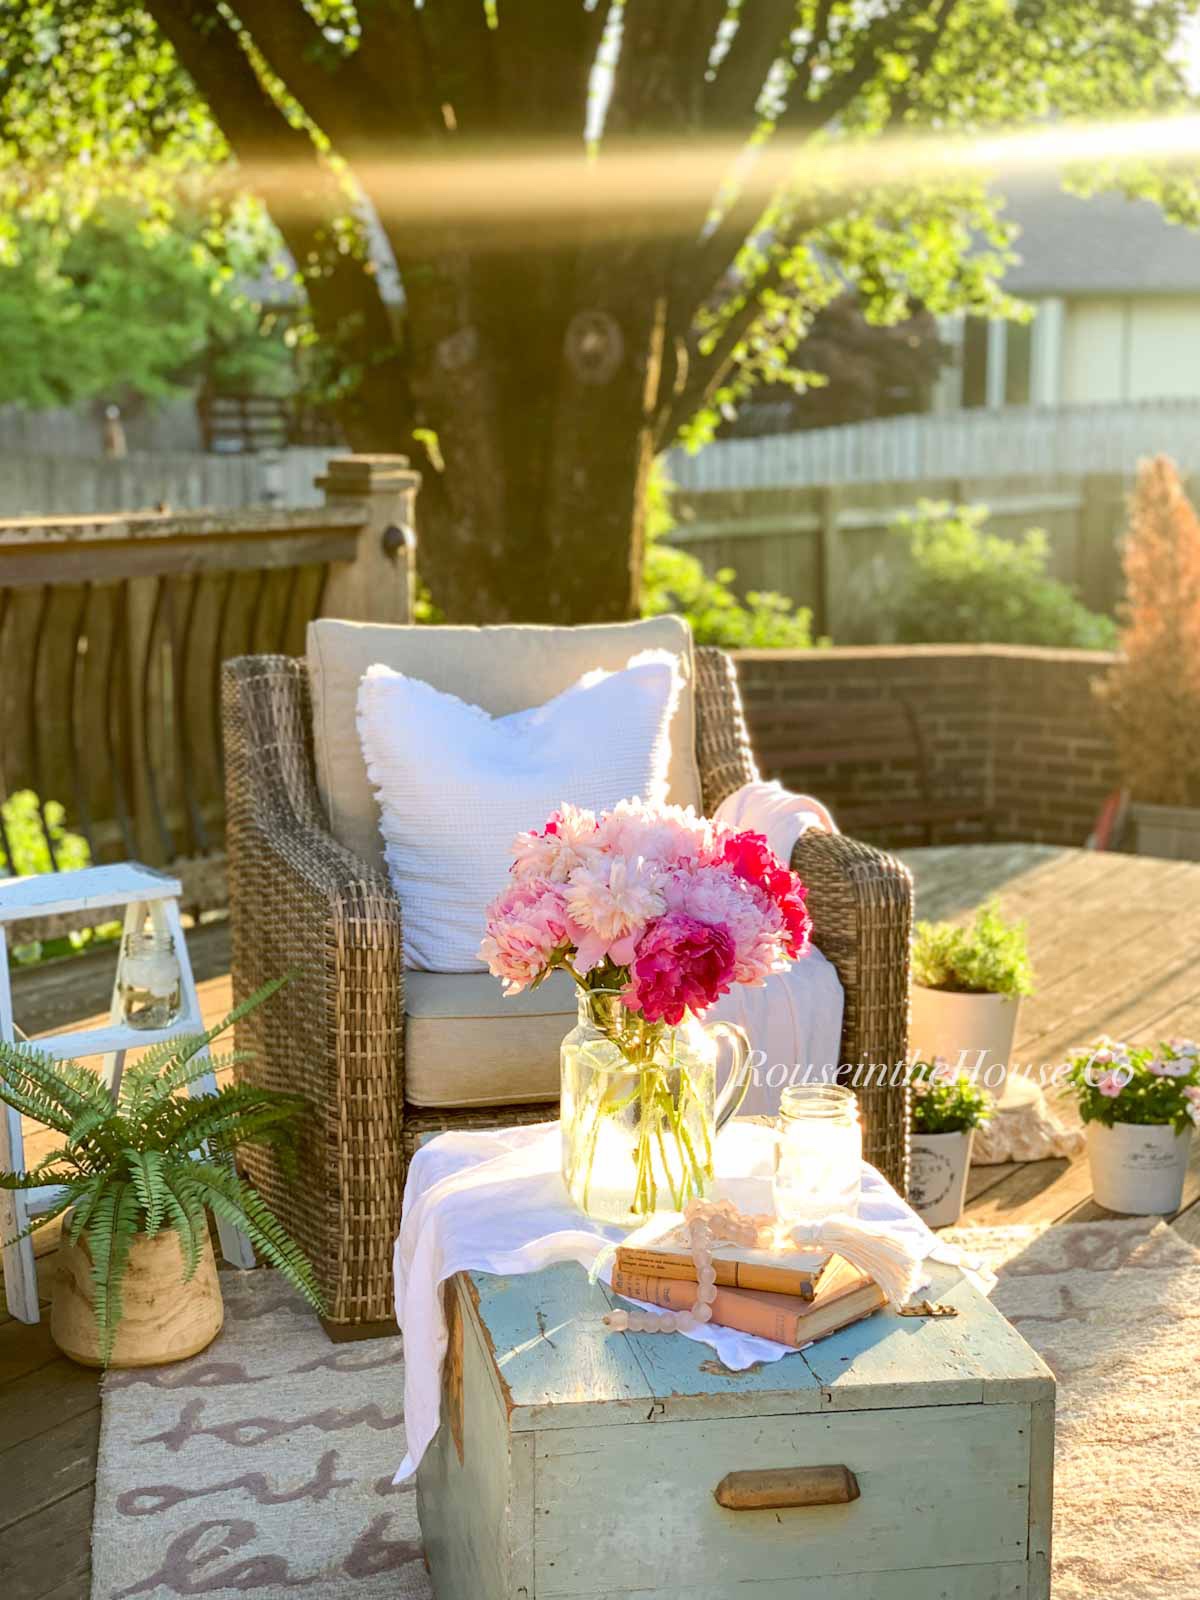 a DIY painted plant stand stenciled in a French Blue French Script is sitting on an outdoor patio. A small vase of pink peonies sit on top of a vintage chest.